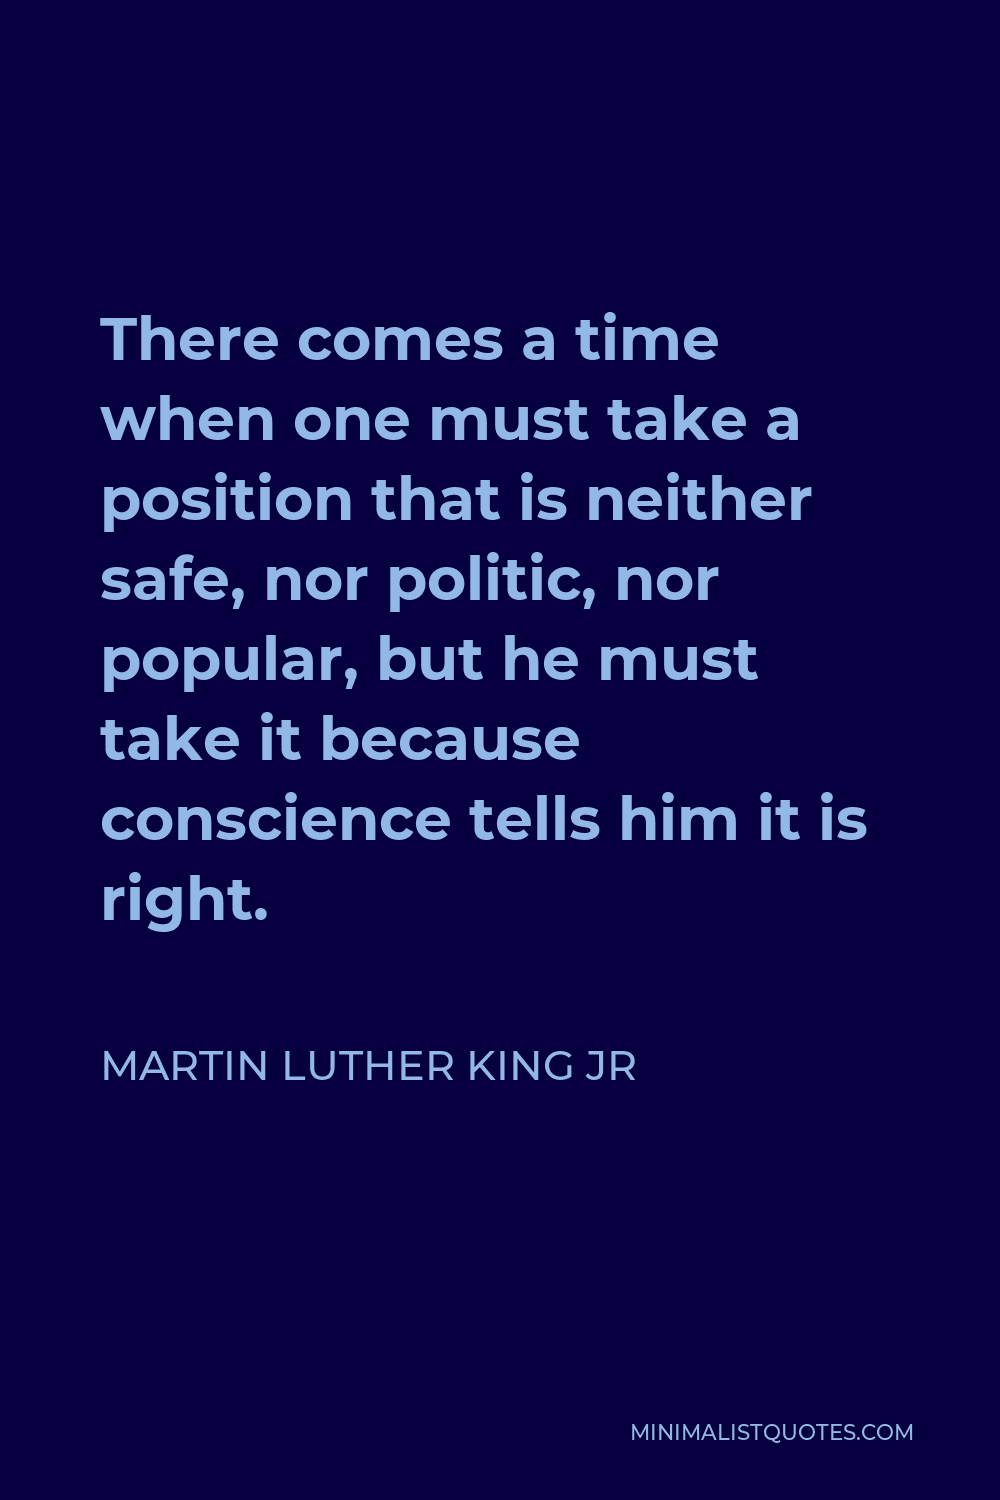 Martin Luther King Jr Quote - There comes a time when one must take a position that is neither safe, nor politic, nor popular, but he must take it because conscience tells him it is right.